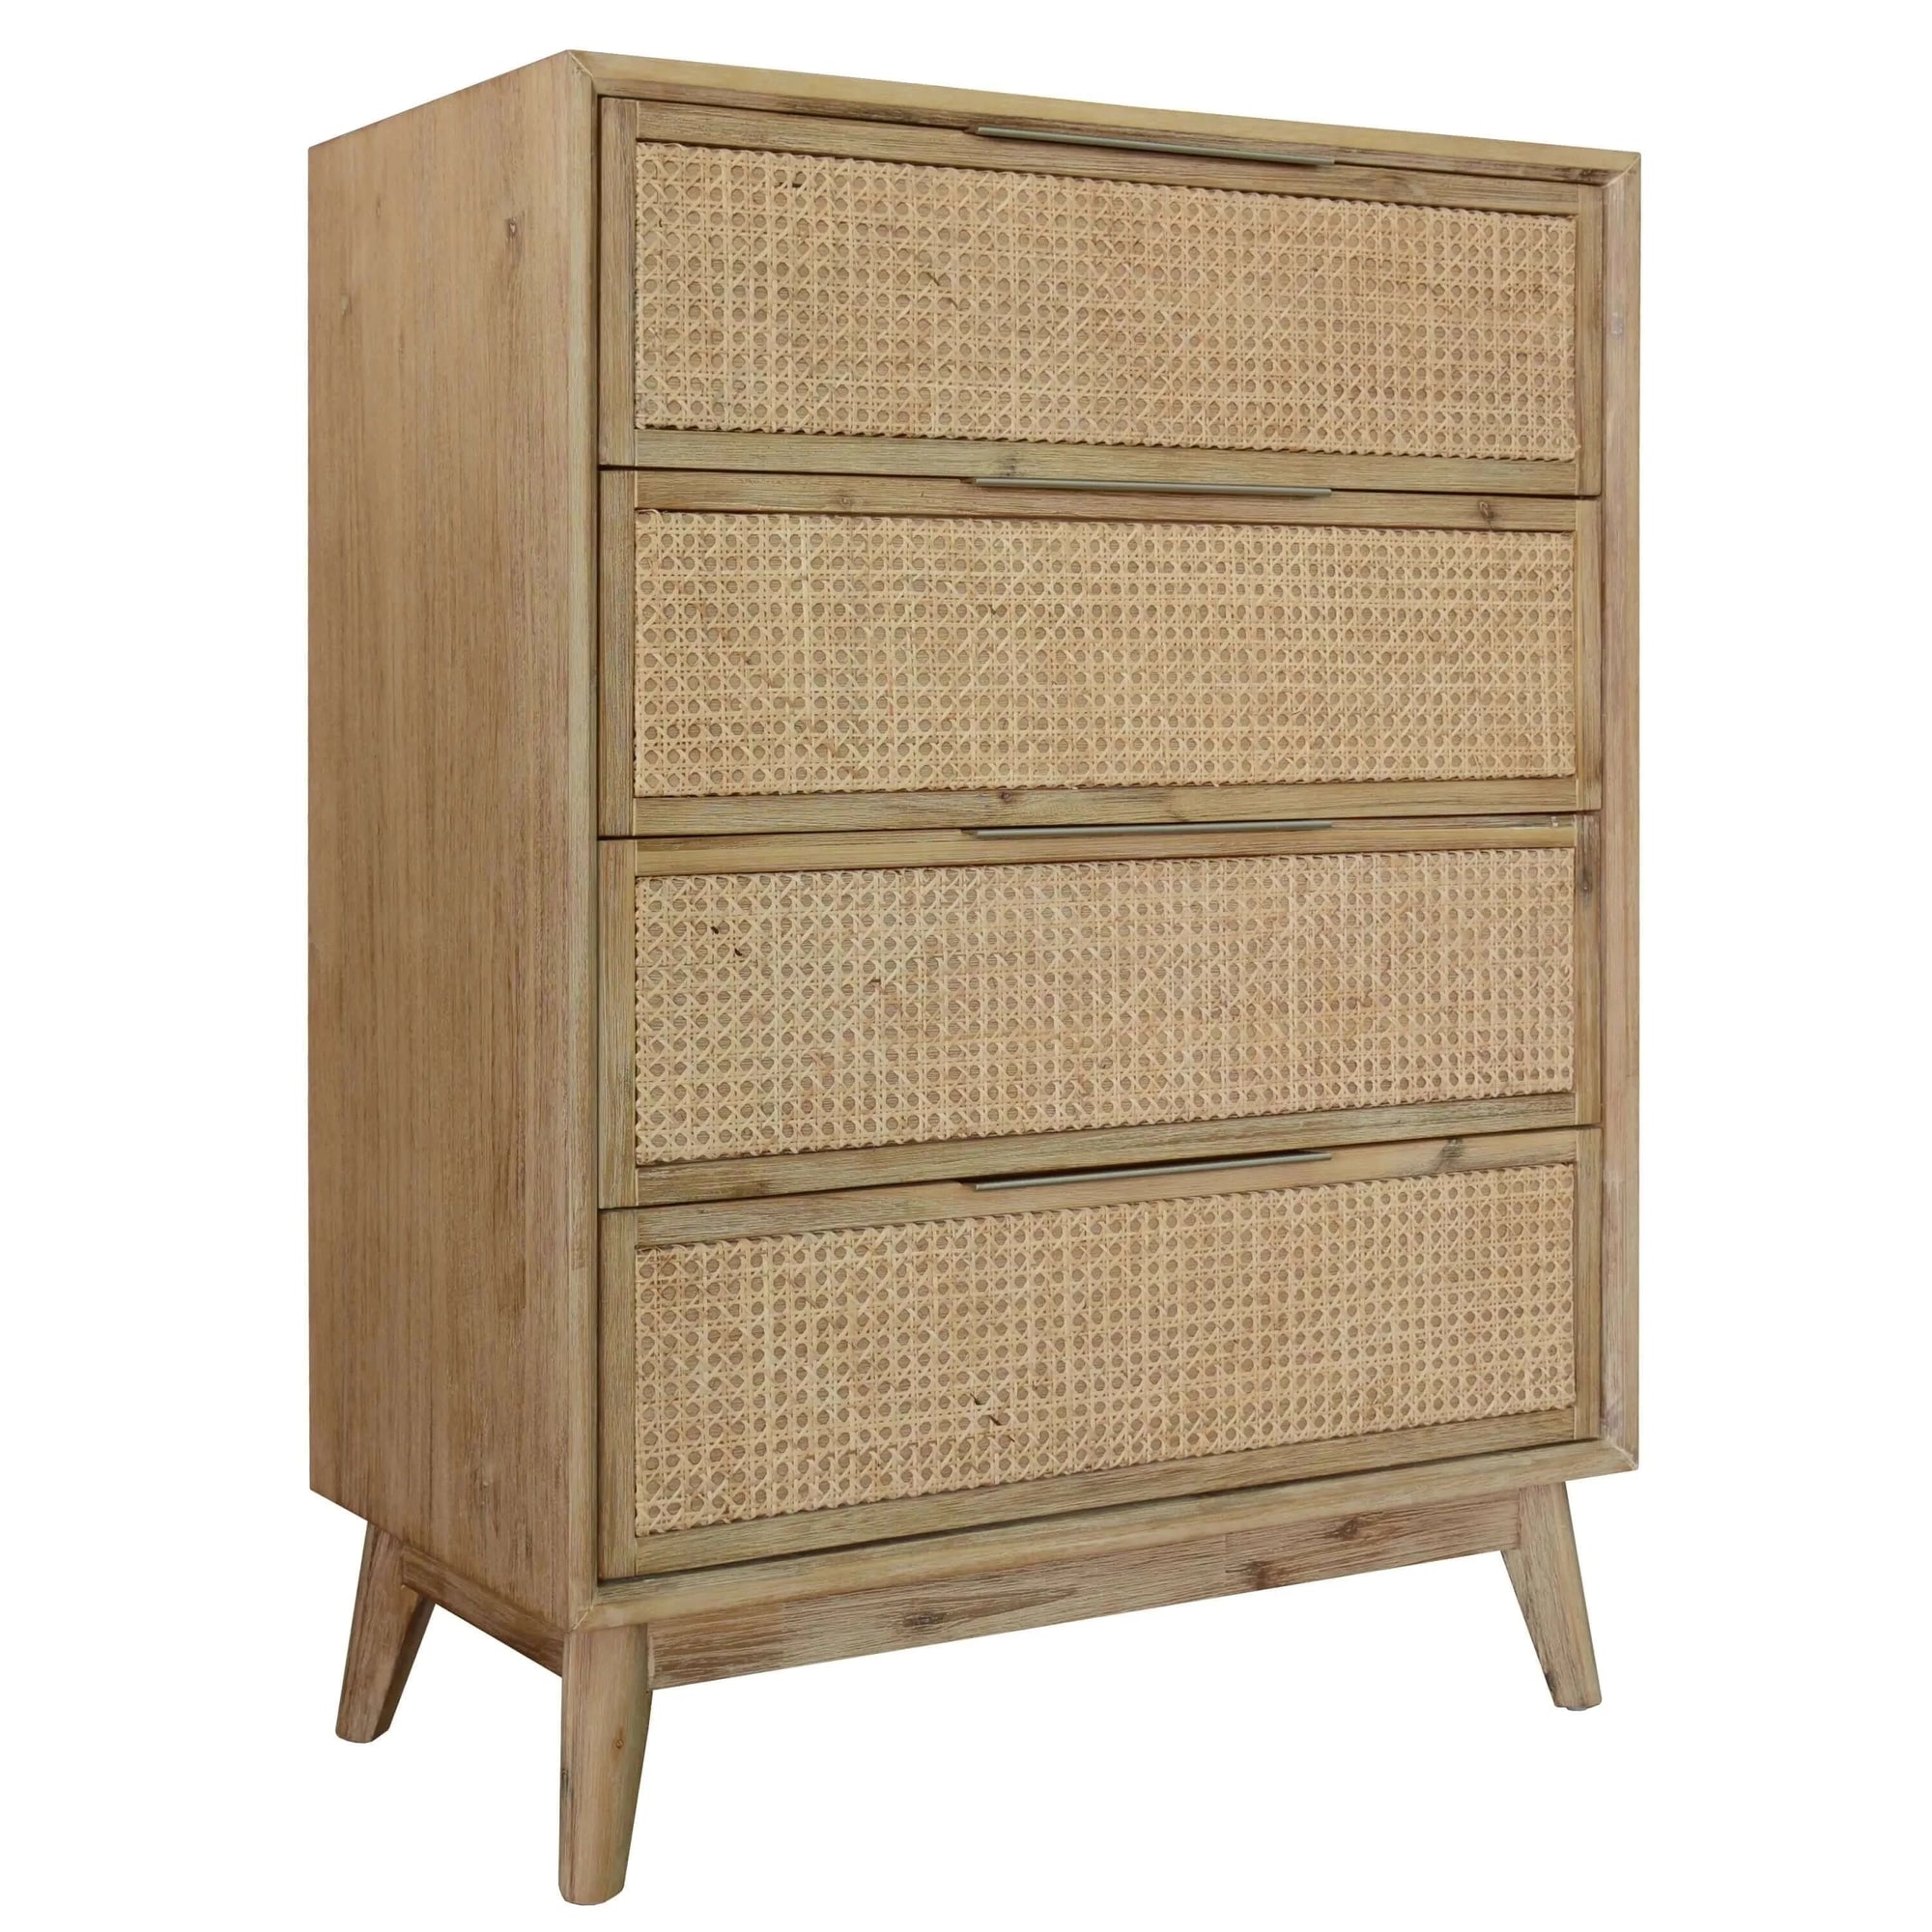 Buy grevillea tallboy 4 chest of drawers solid acacia wood storage cabinet - brown - upinteriors-Upinteriors